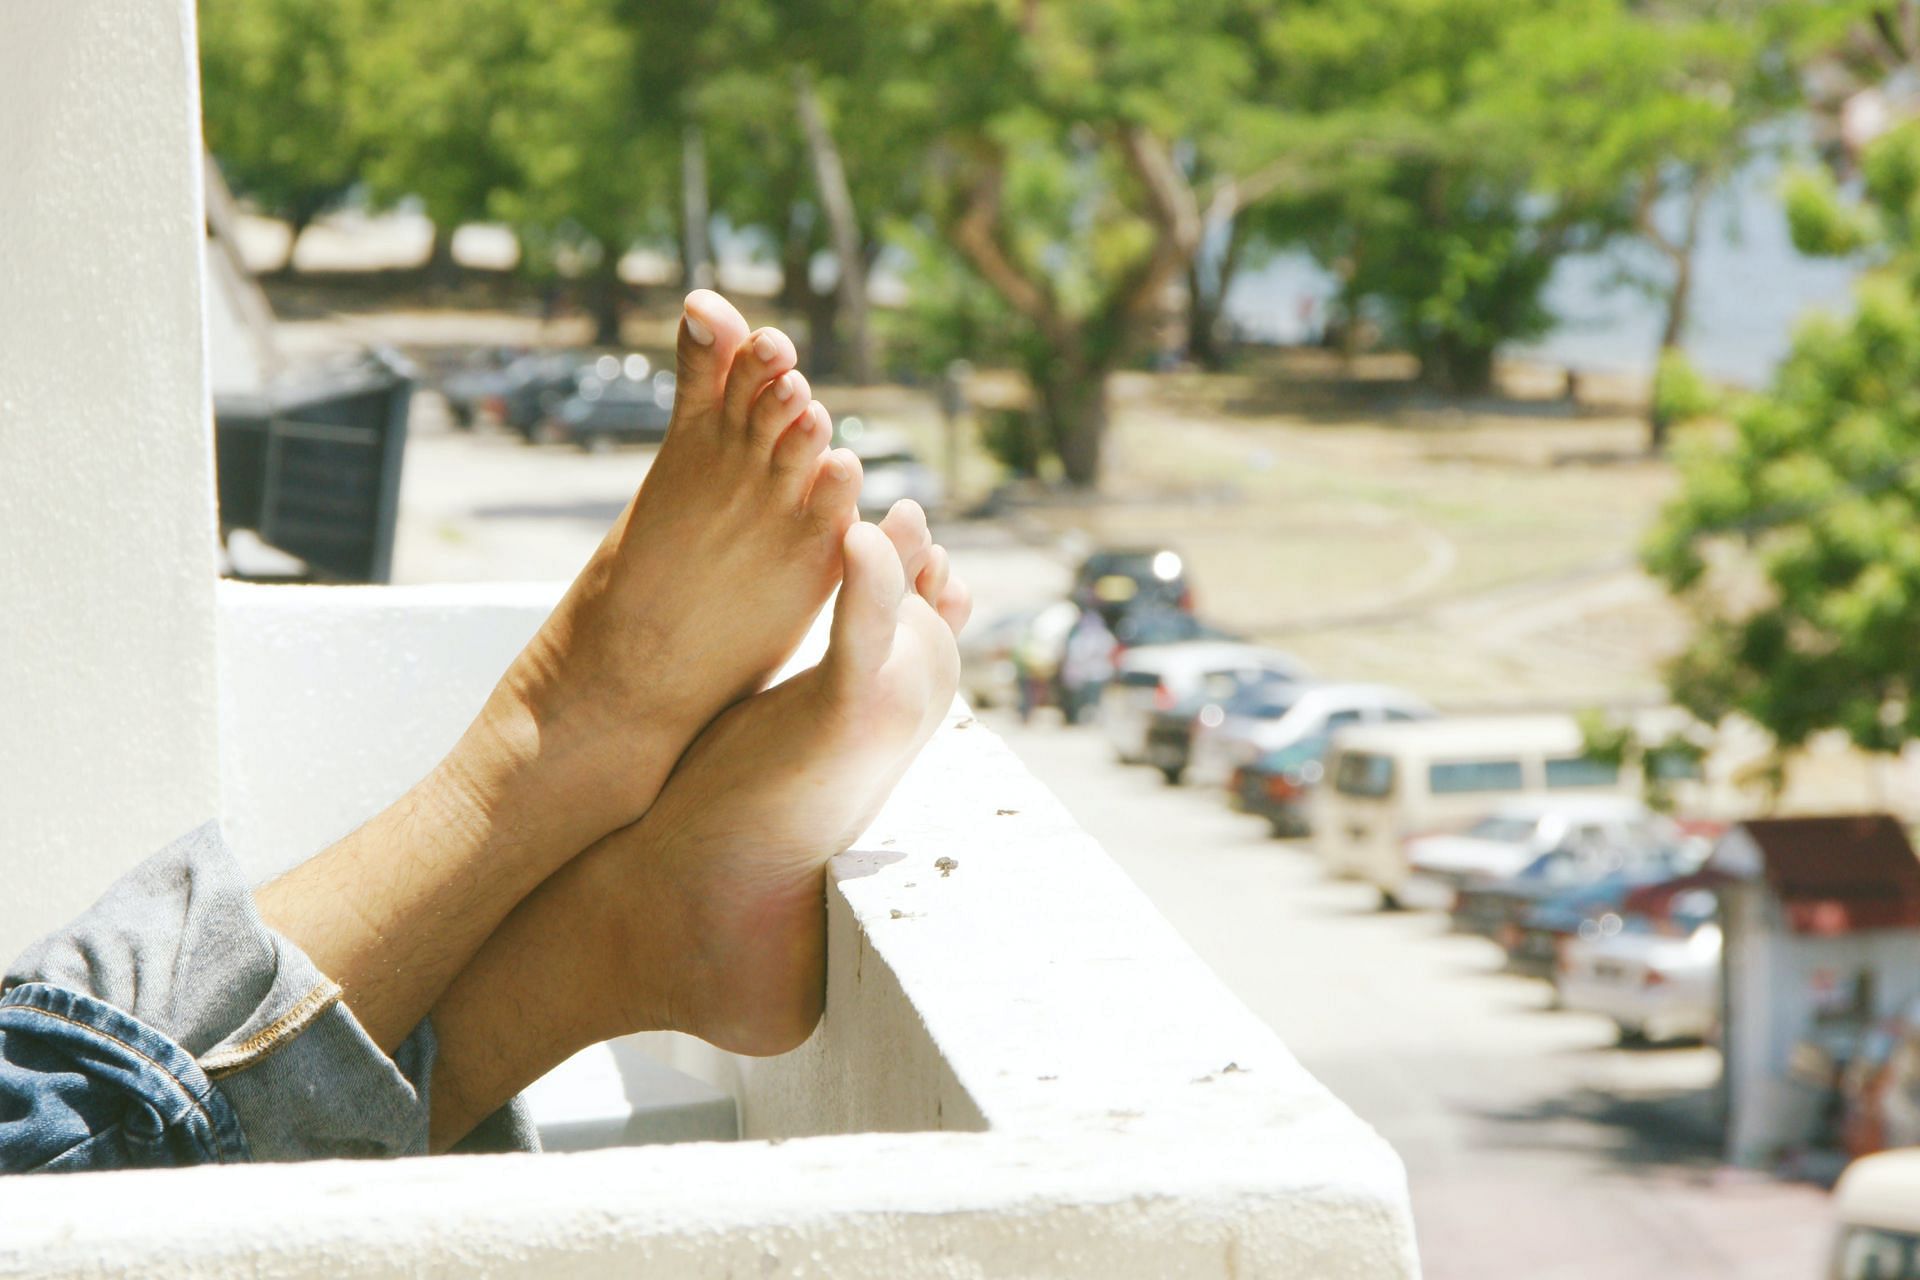 Importance of swollen toes causes (image sourced via Pexels / Photo by khairul)